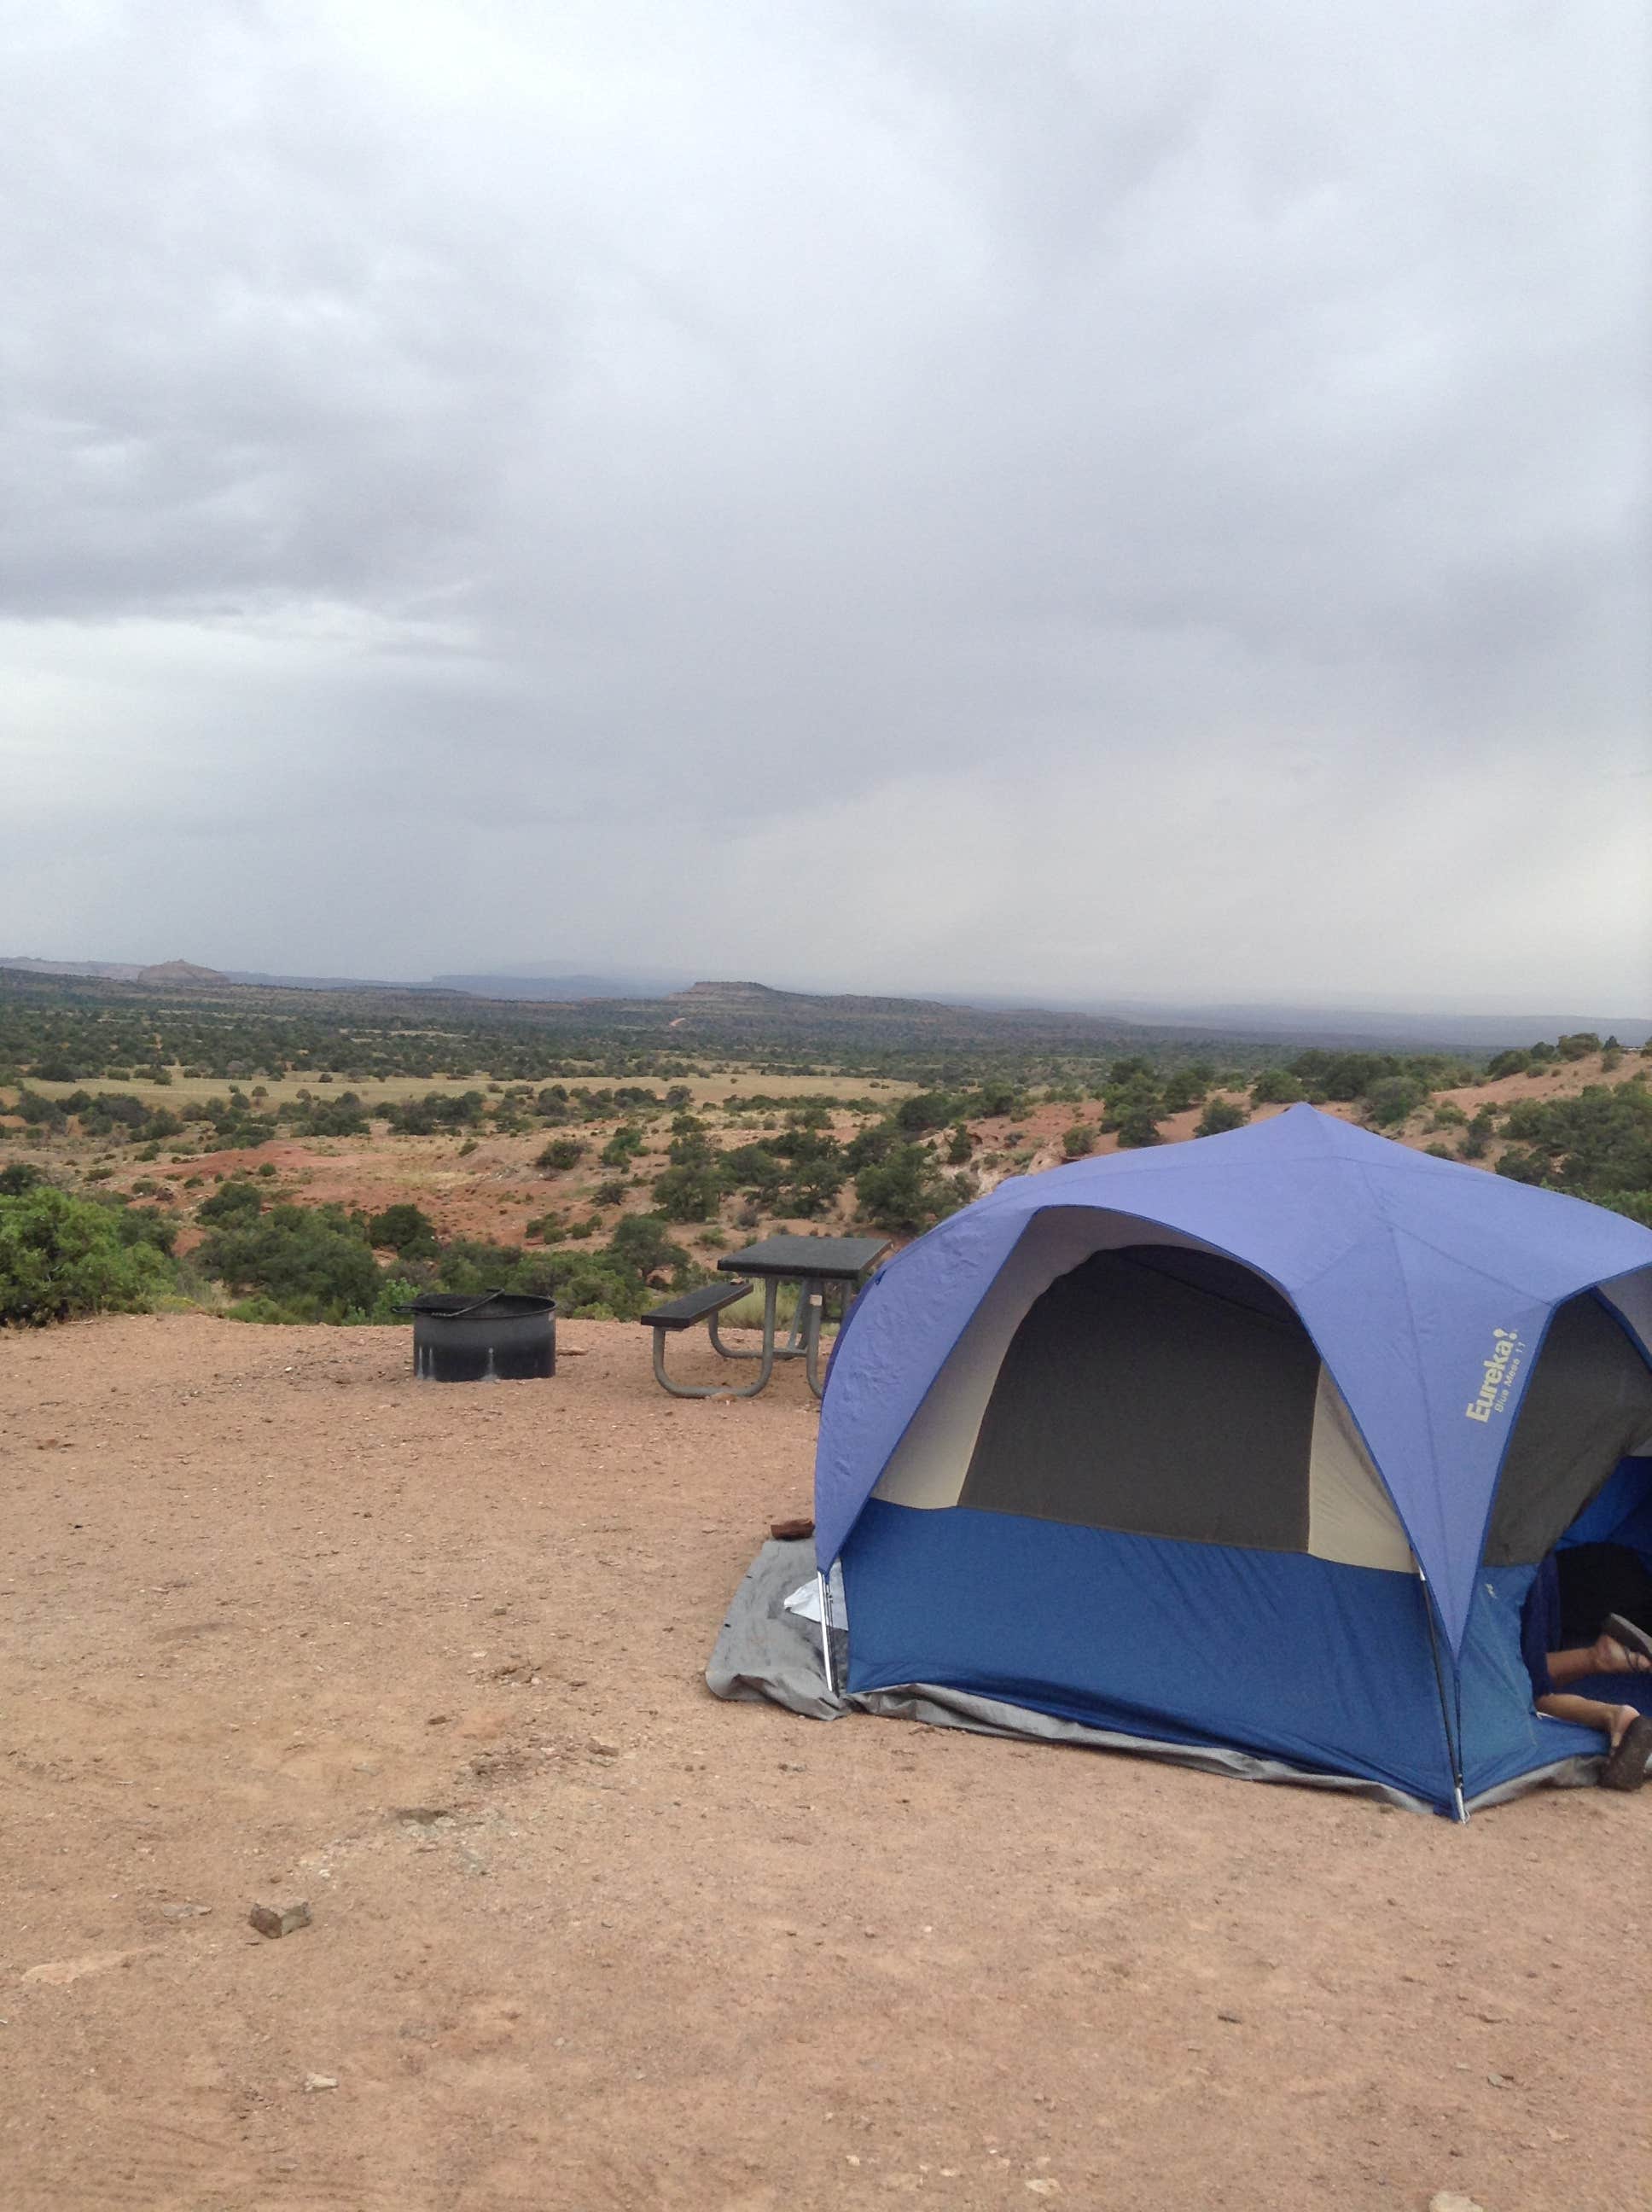 Camper submitted image from Cowboy Camp Campground - 5